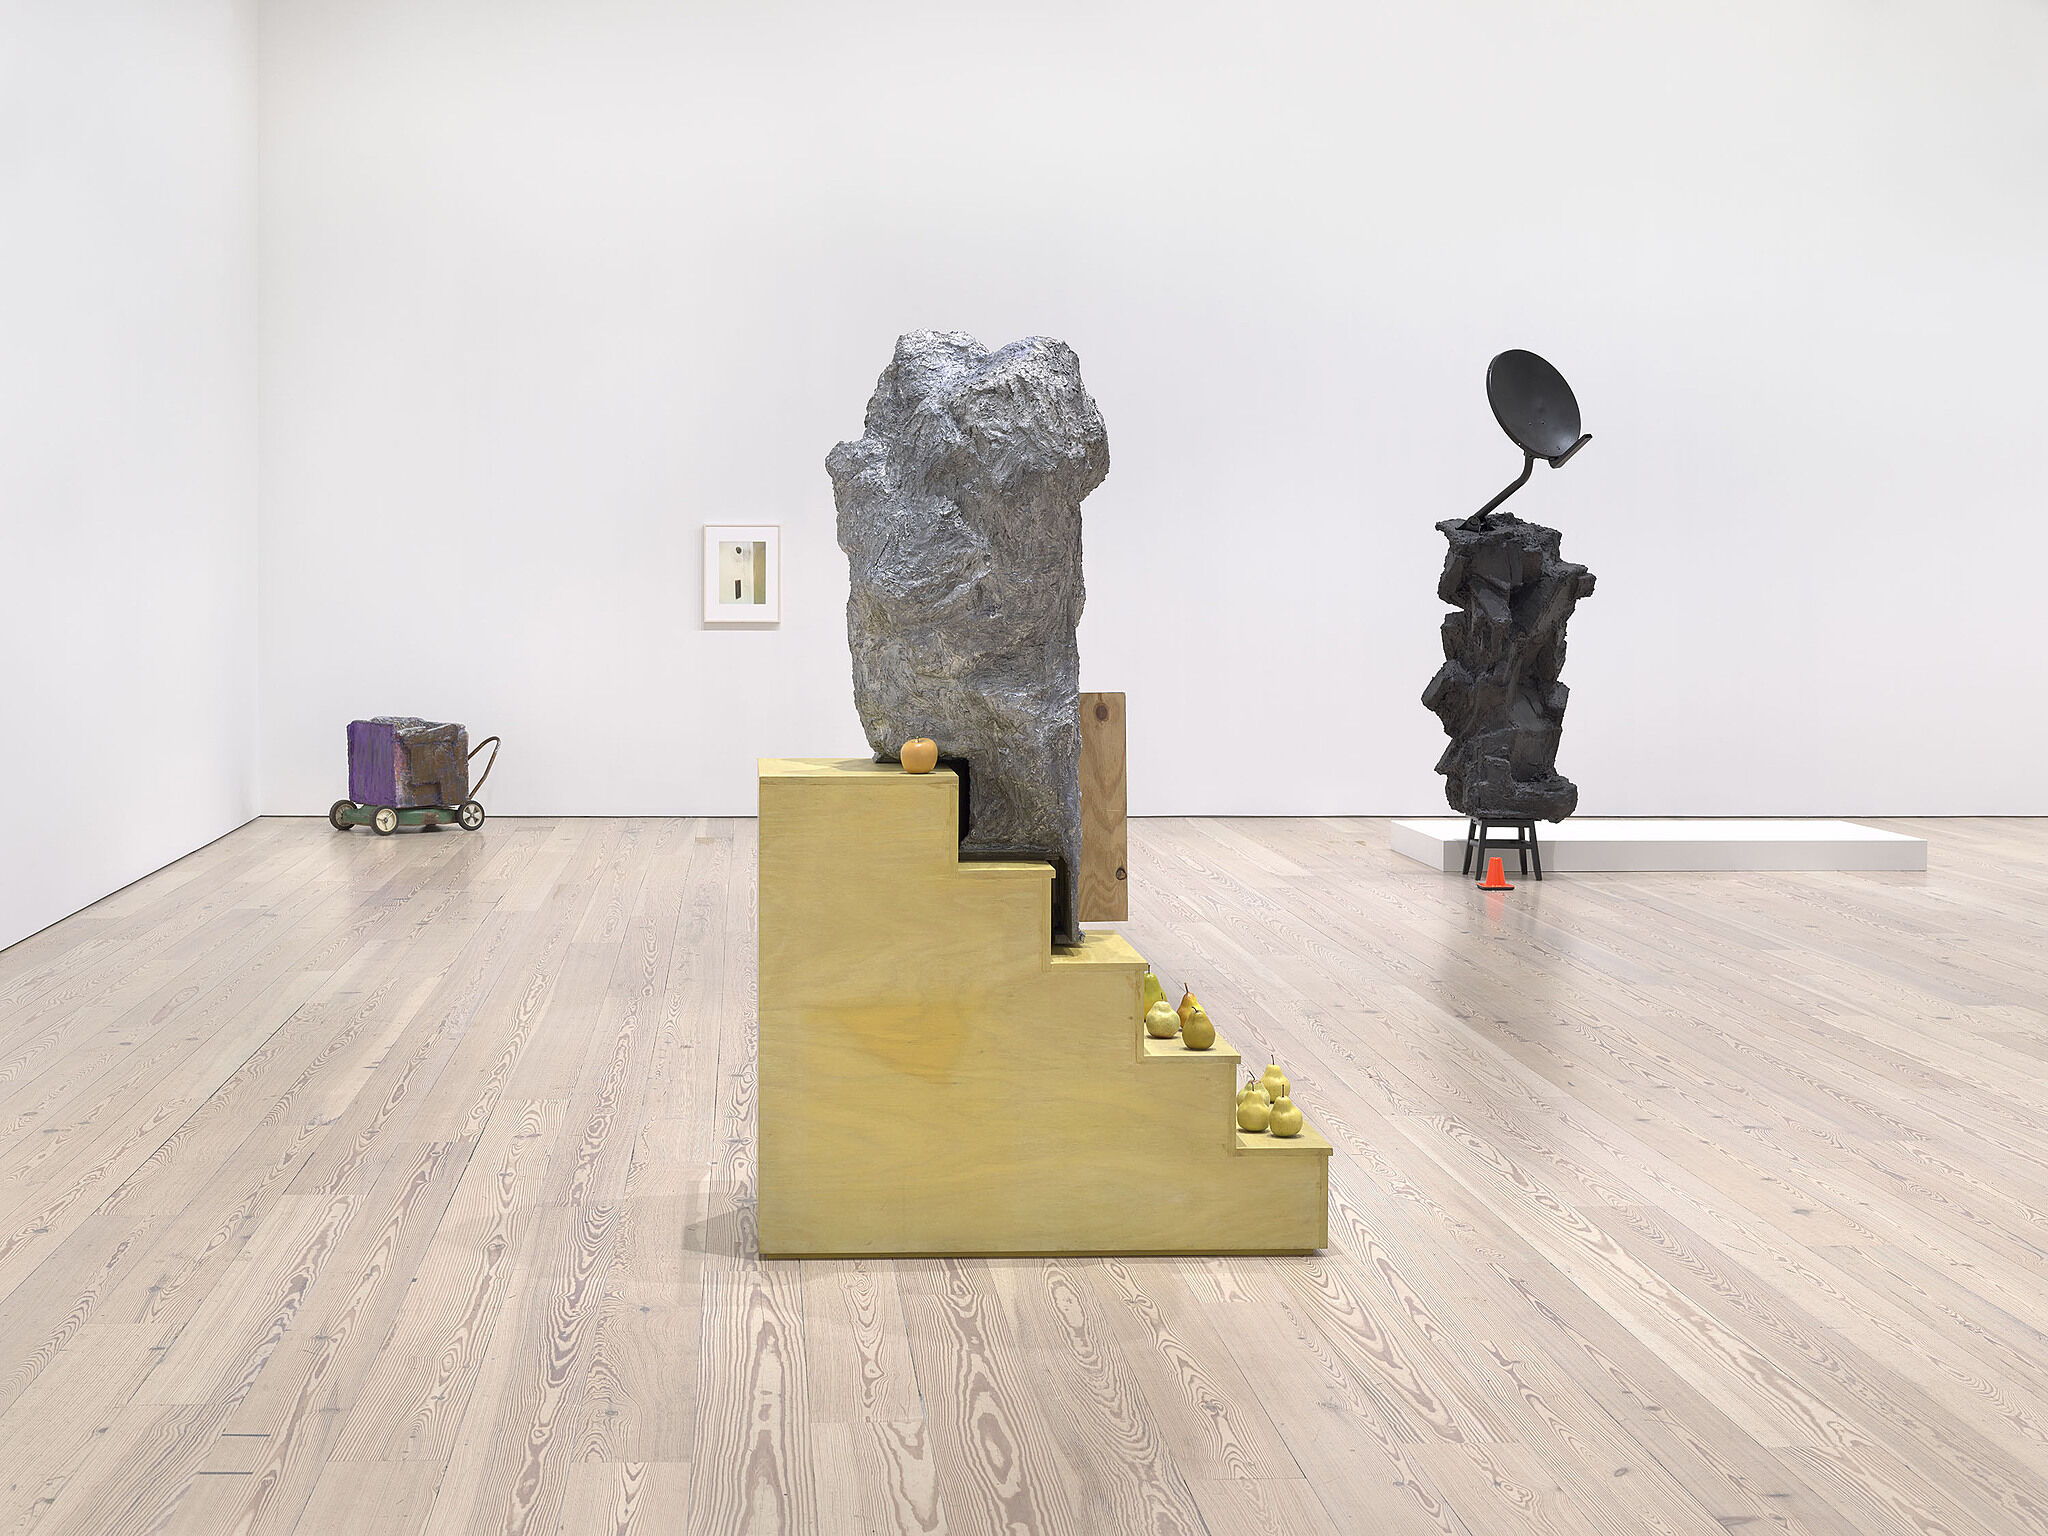 An image of the Whitney galleries with various sculptures.